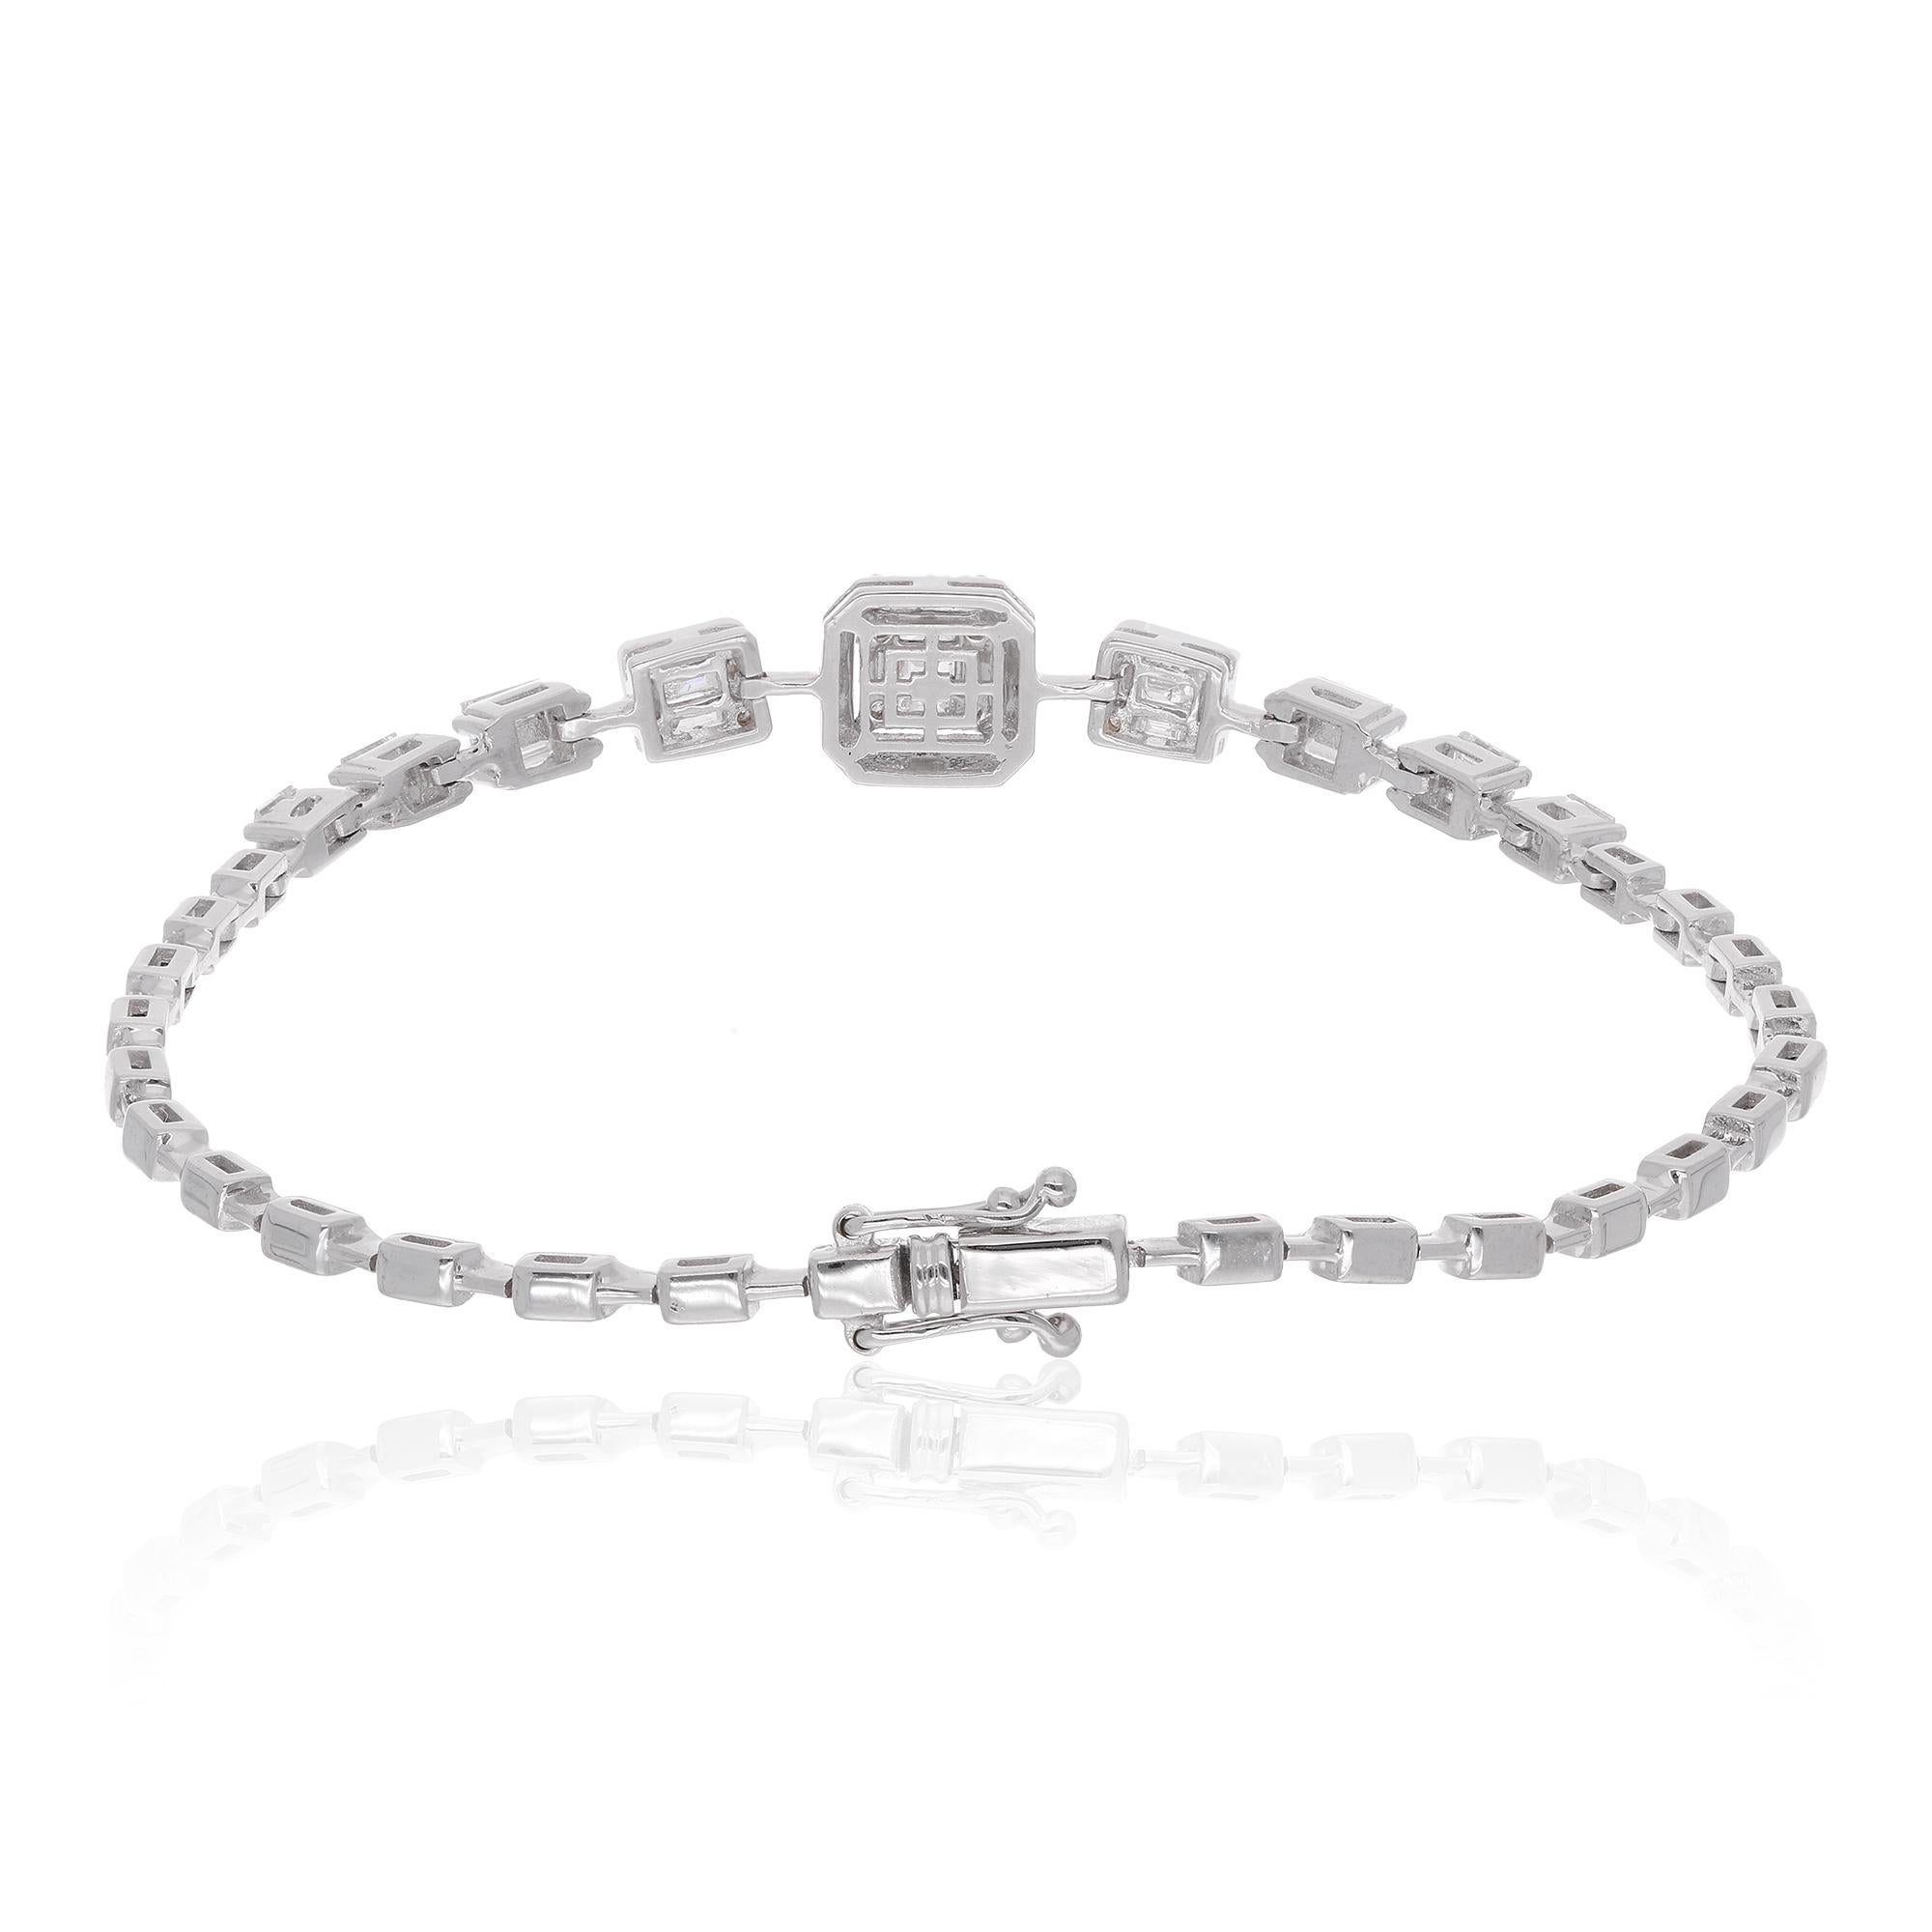 Crafted with utmost precision and attention to detail, this fine charm bracelet exudes sophistication and refinement, making it the perfect accessory for any occasion. Whether worn alone for a touch of understated luxury or layered with other